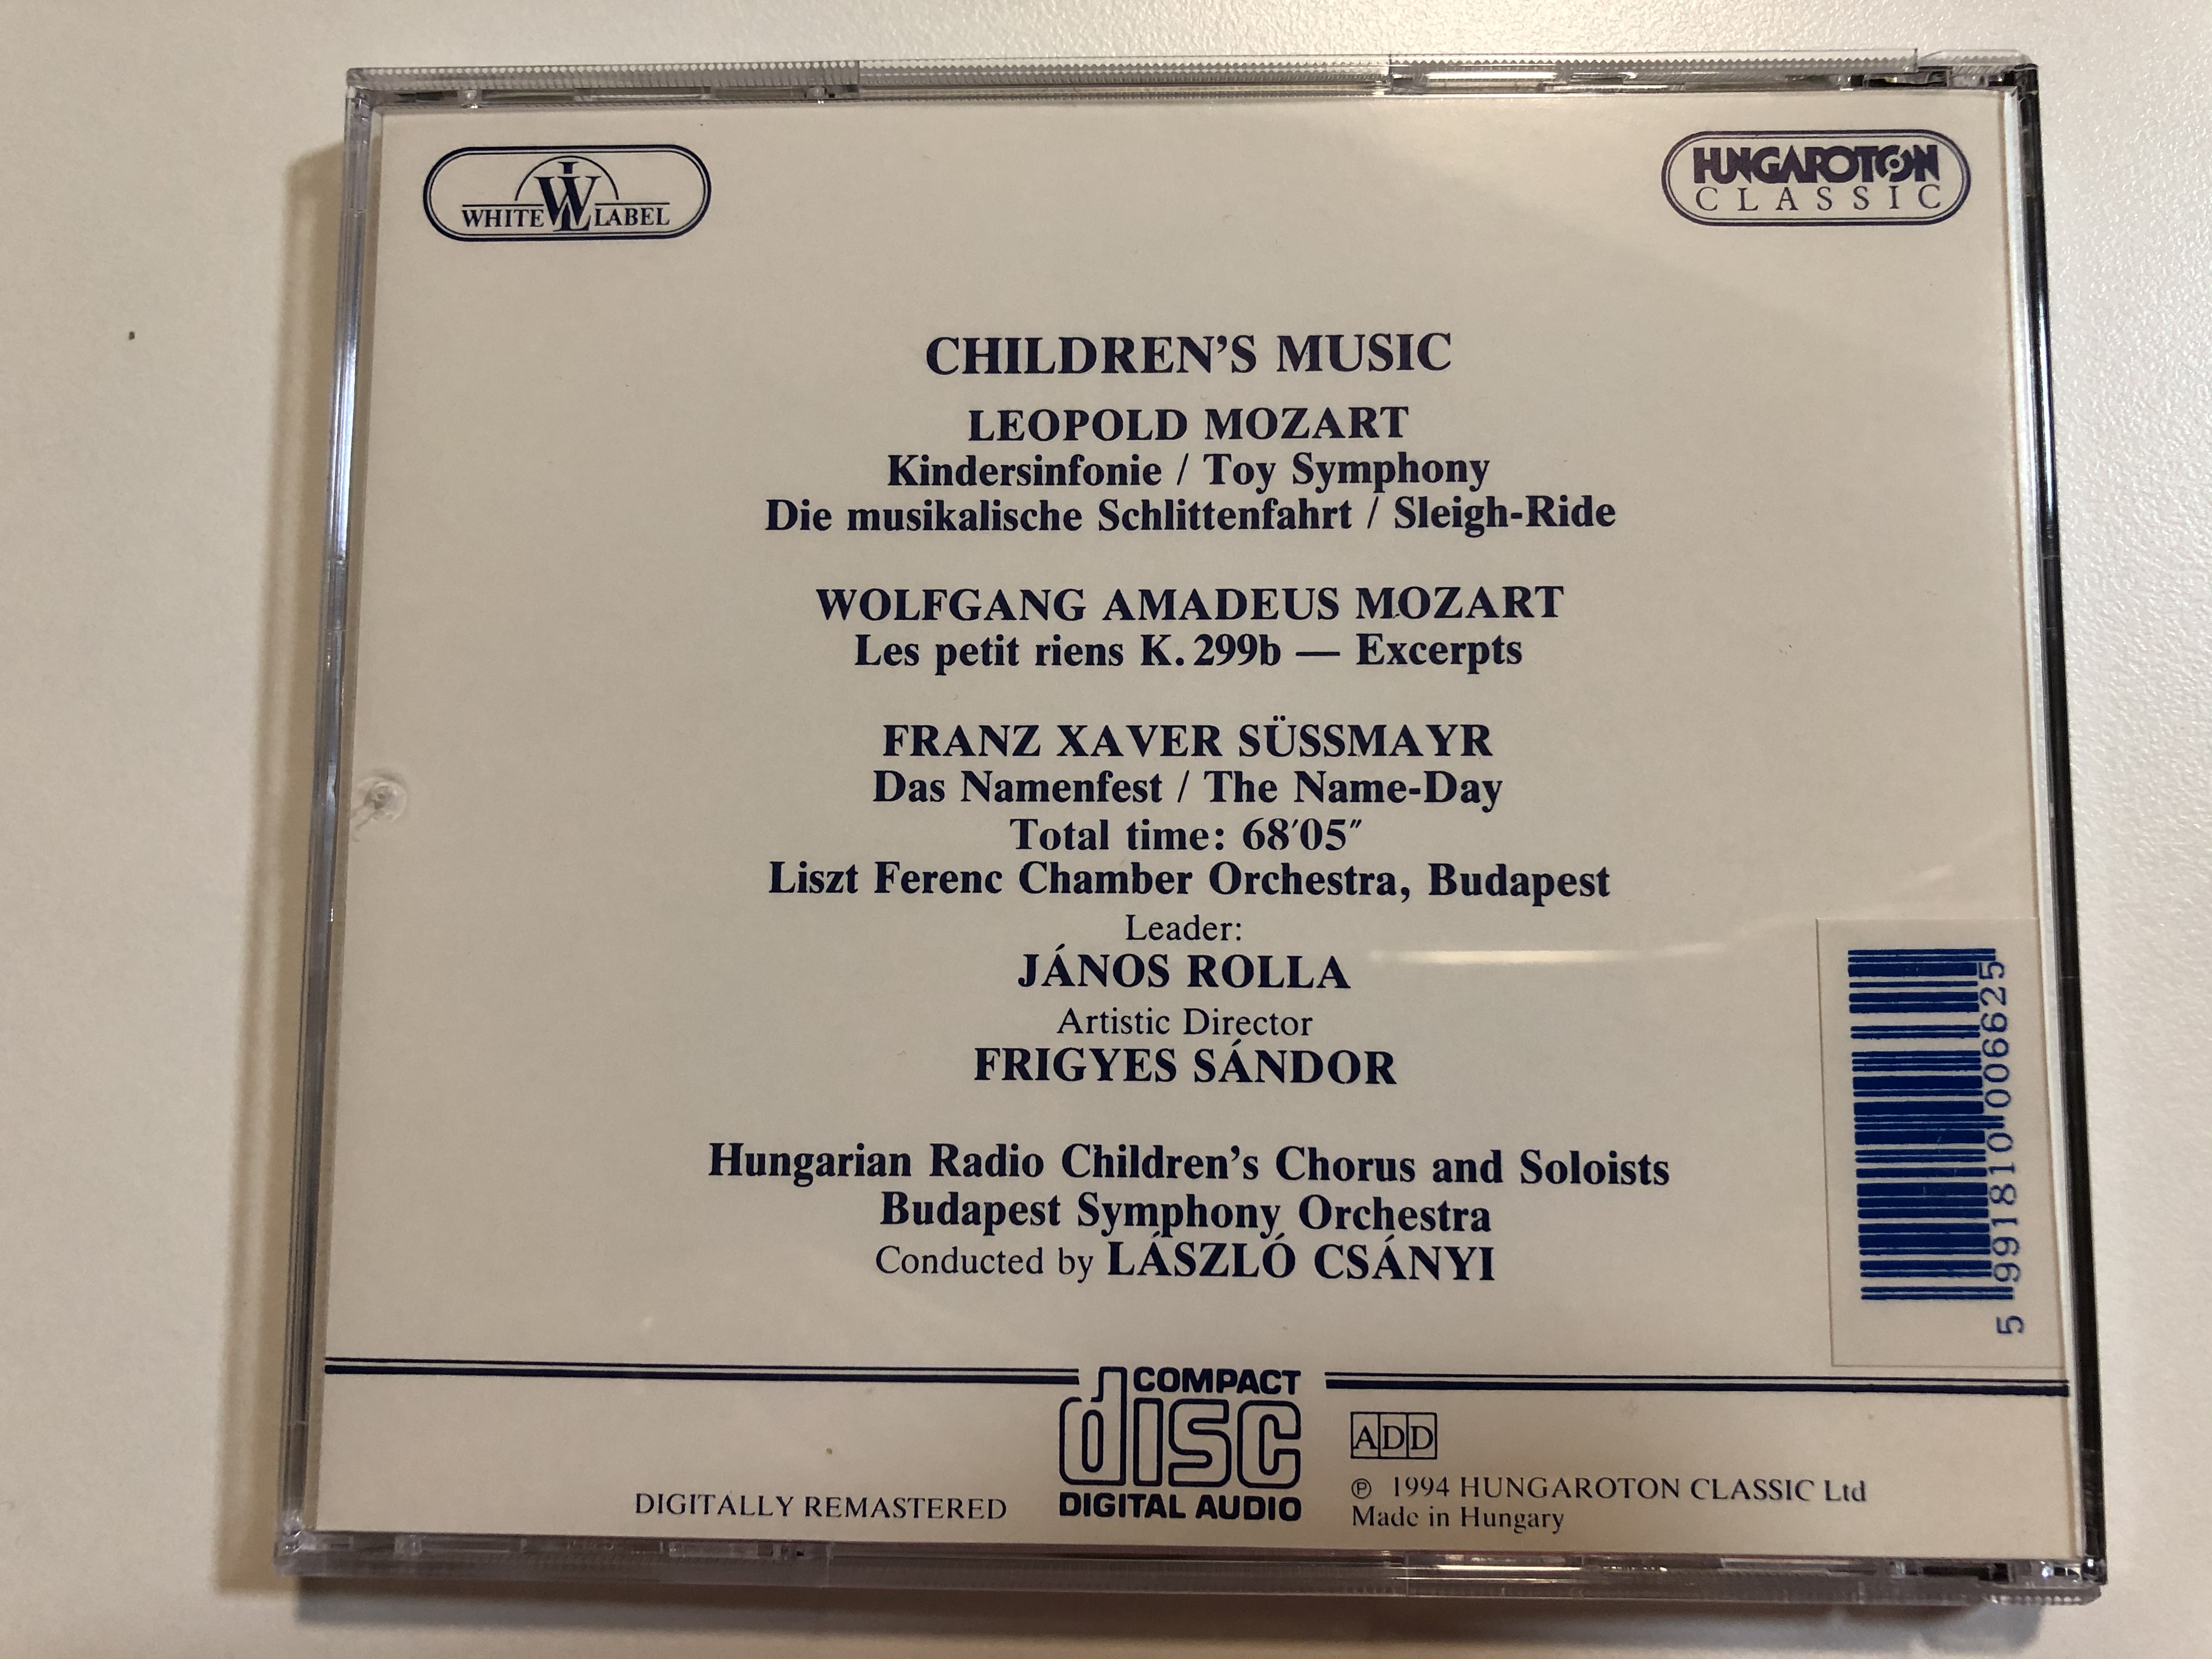 sussmayr-the-name-day-w.a.-mozart-les-petits-riens-leopold-mozart-toy-symphony-sleigh-rise-hungaroton-classic-audio-cd-1994-hrc-066-4-.jpg